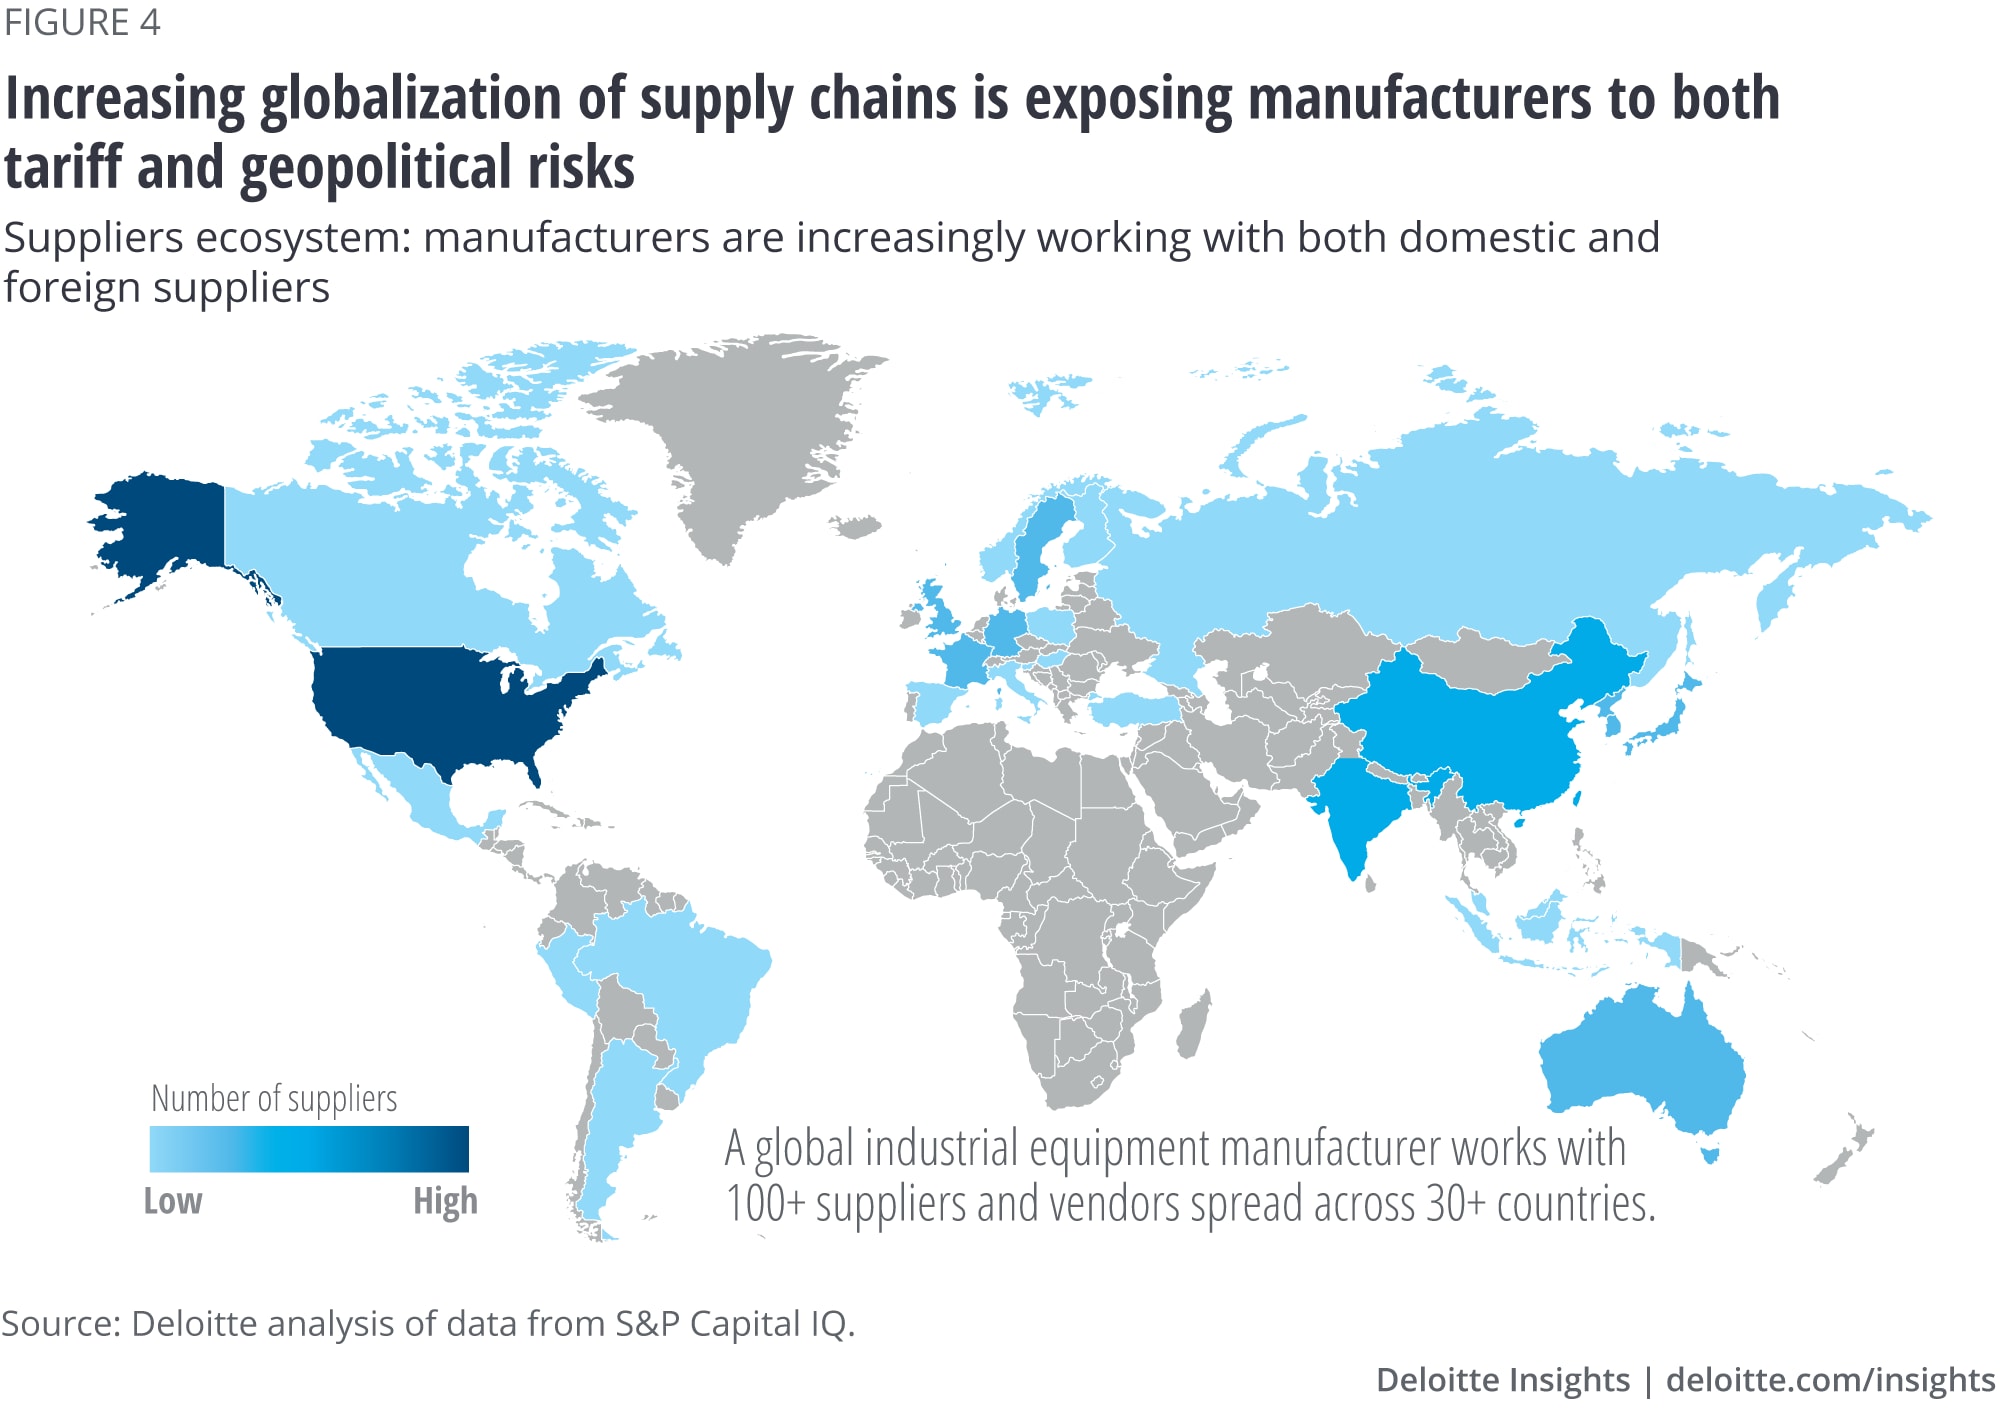 Increasing globalization of supply chains is exposing manufacturers to both tariff and geopolitical risks